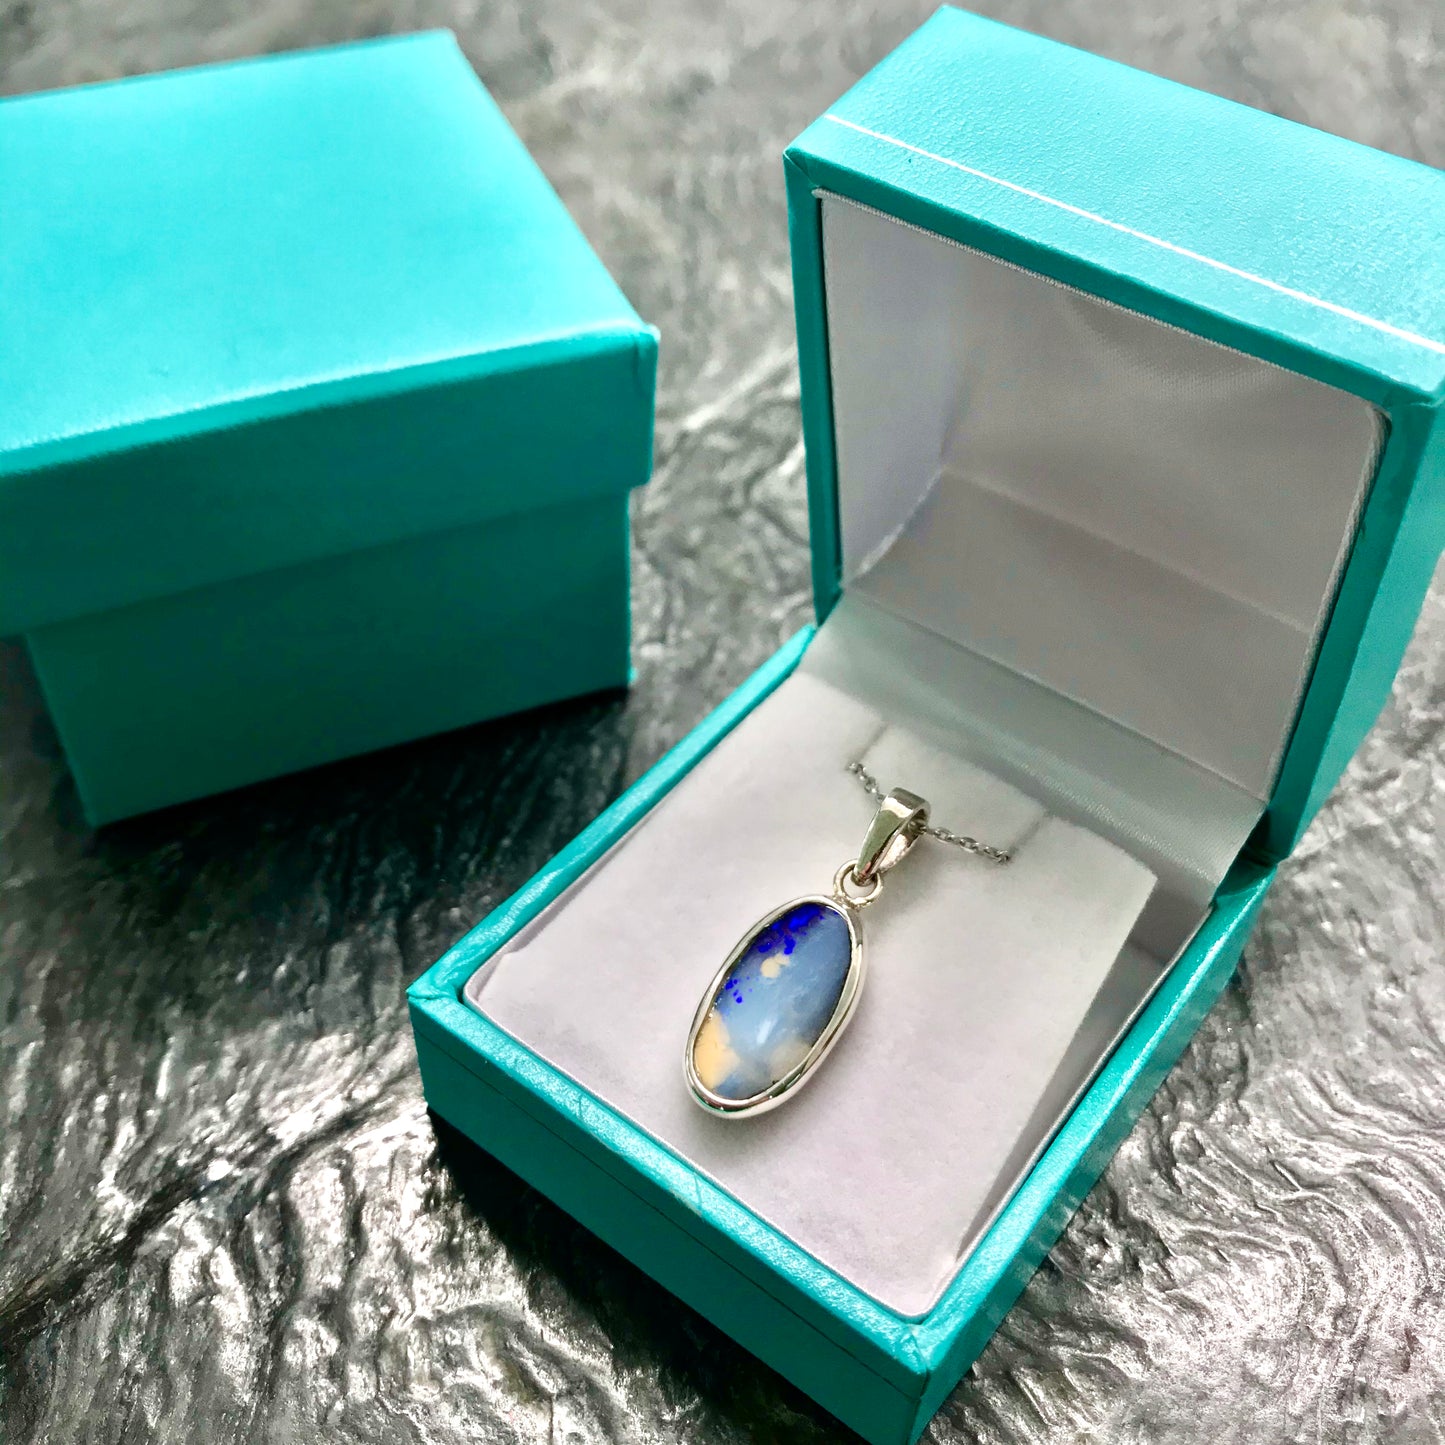 A photo of a Quilpie Australian blue boulder opal with tan matrix set into a sterling silver bezel pendant.  The opal resembles a beach with tan sand matrix and a blue ocean of color.  The pendant is on a sterling silver cable chain and in a Tiffany blue box.